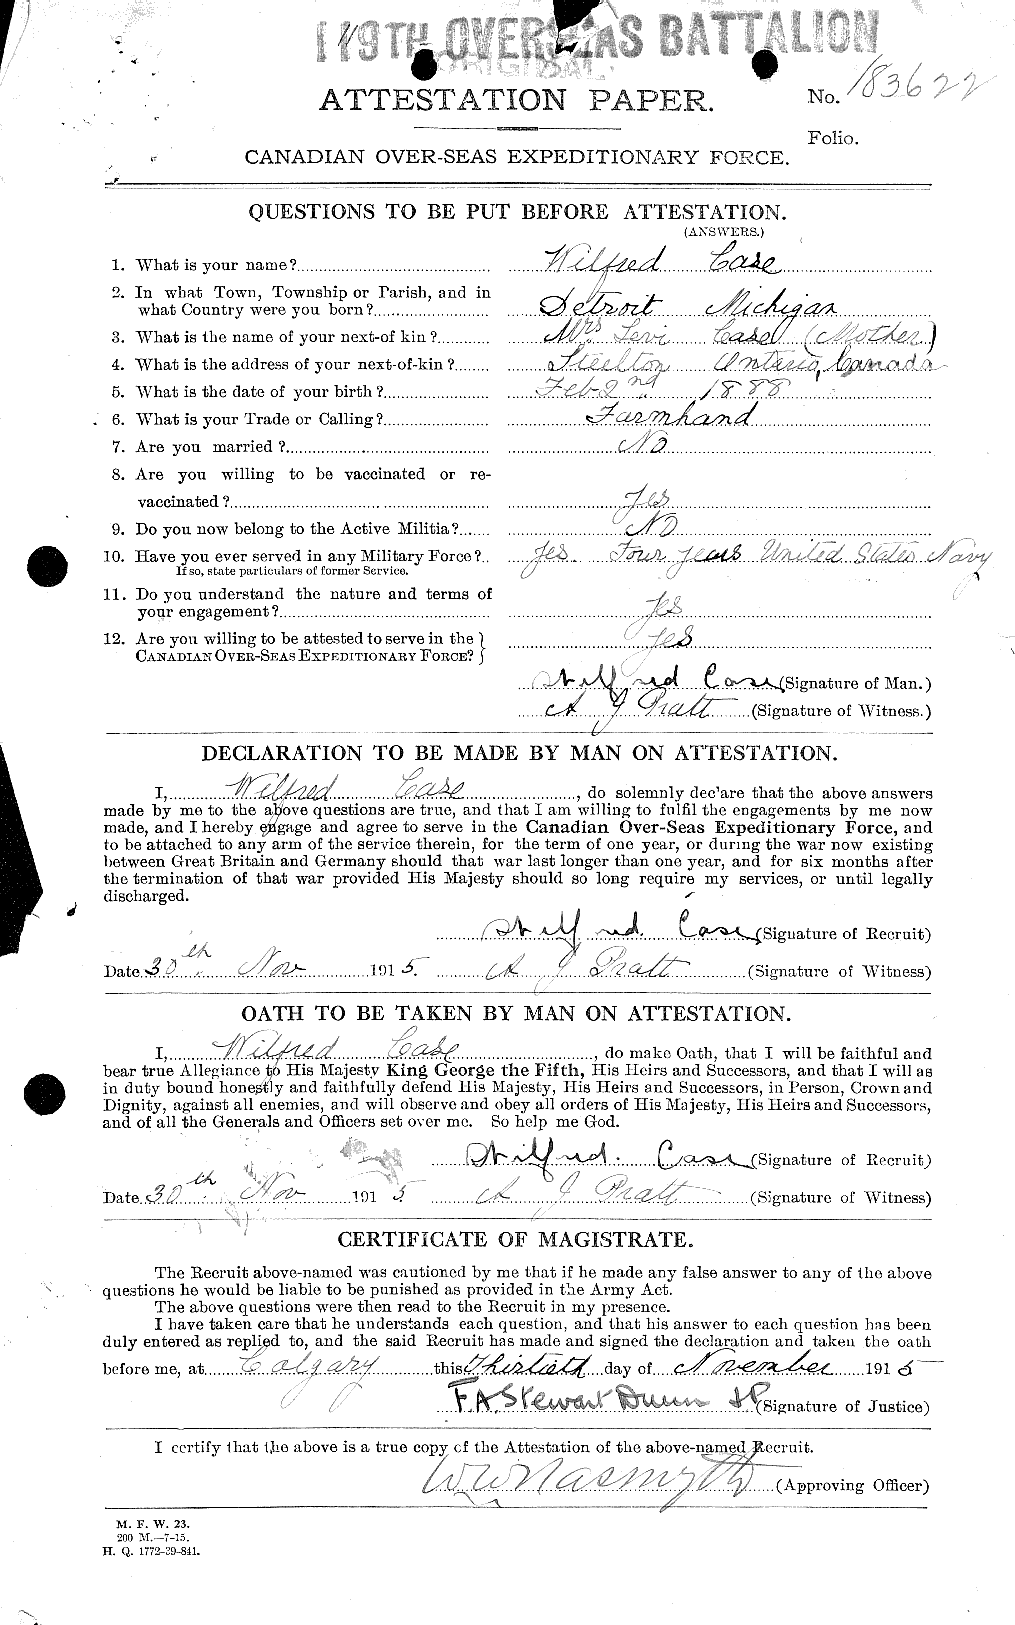 Personnel Records of the First World War - CEF 012737a